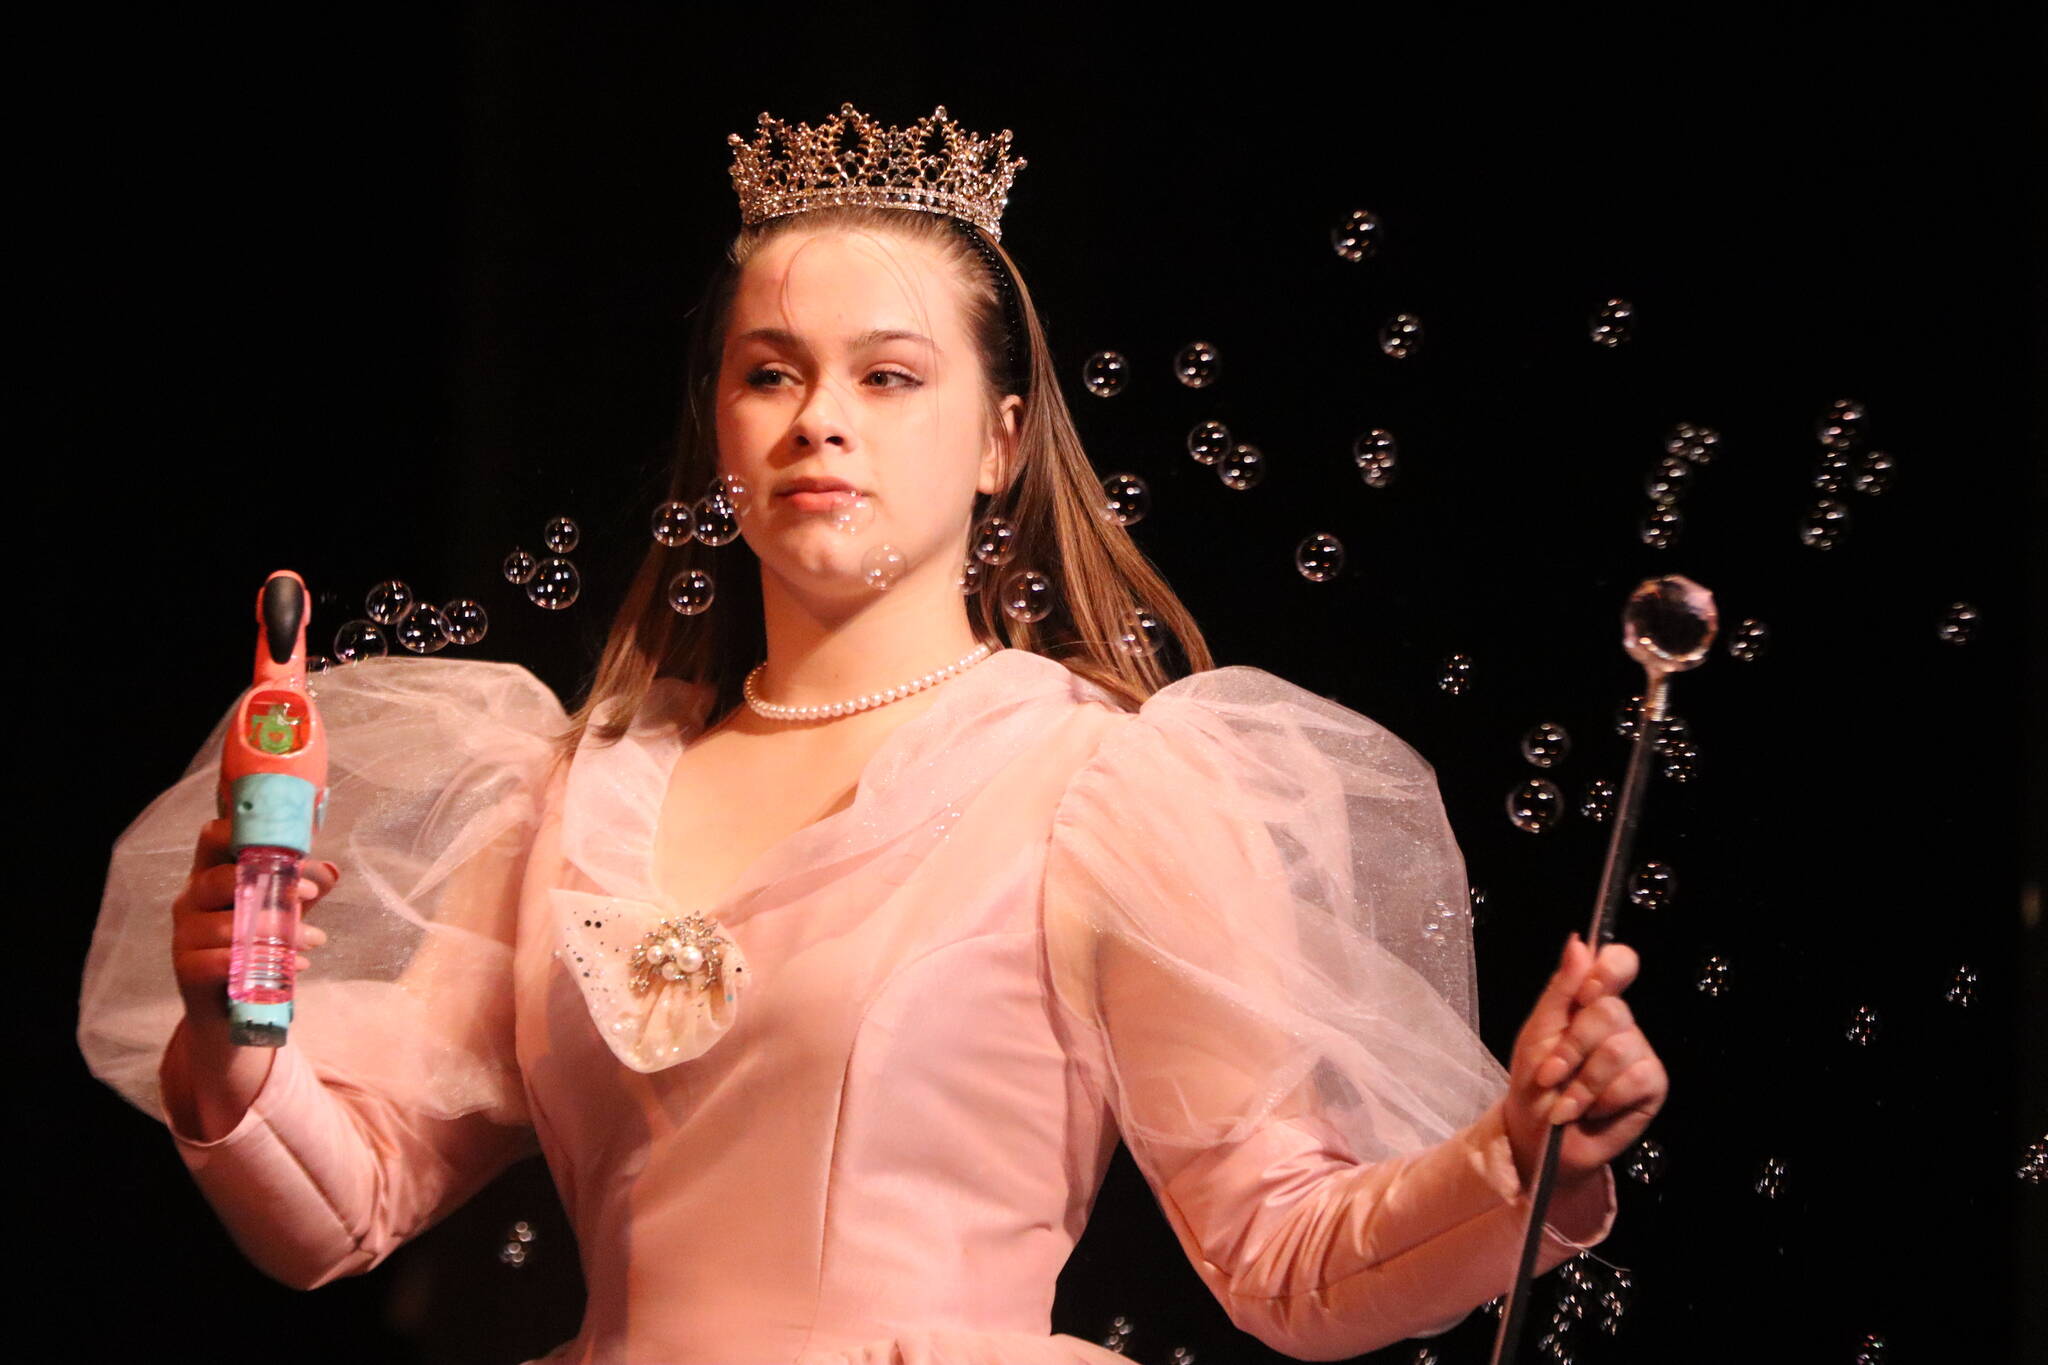 JDHS junior Rachel Wood stars as Glinda the Good Witch in the Juneau high school’s production of “The Wizard of Oz.” The cast is comprised of students from both JDHS, TMHS and students homeschooling, as well. (Jonson Kuhn / Juneau Empire)